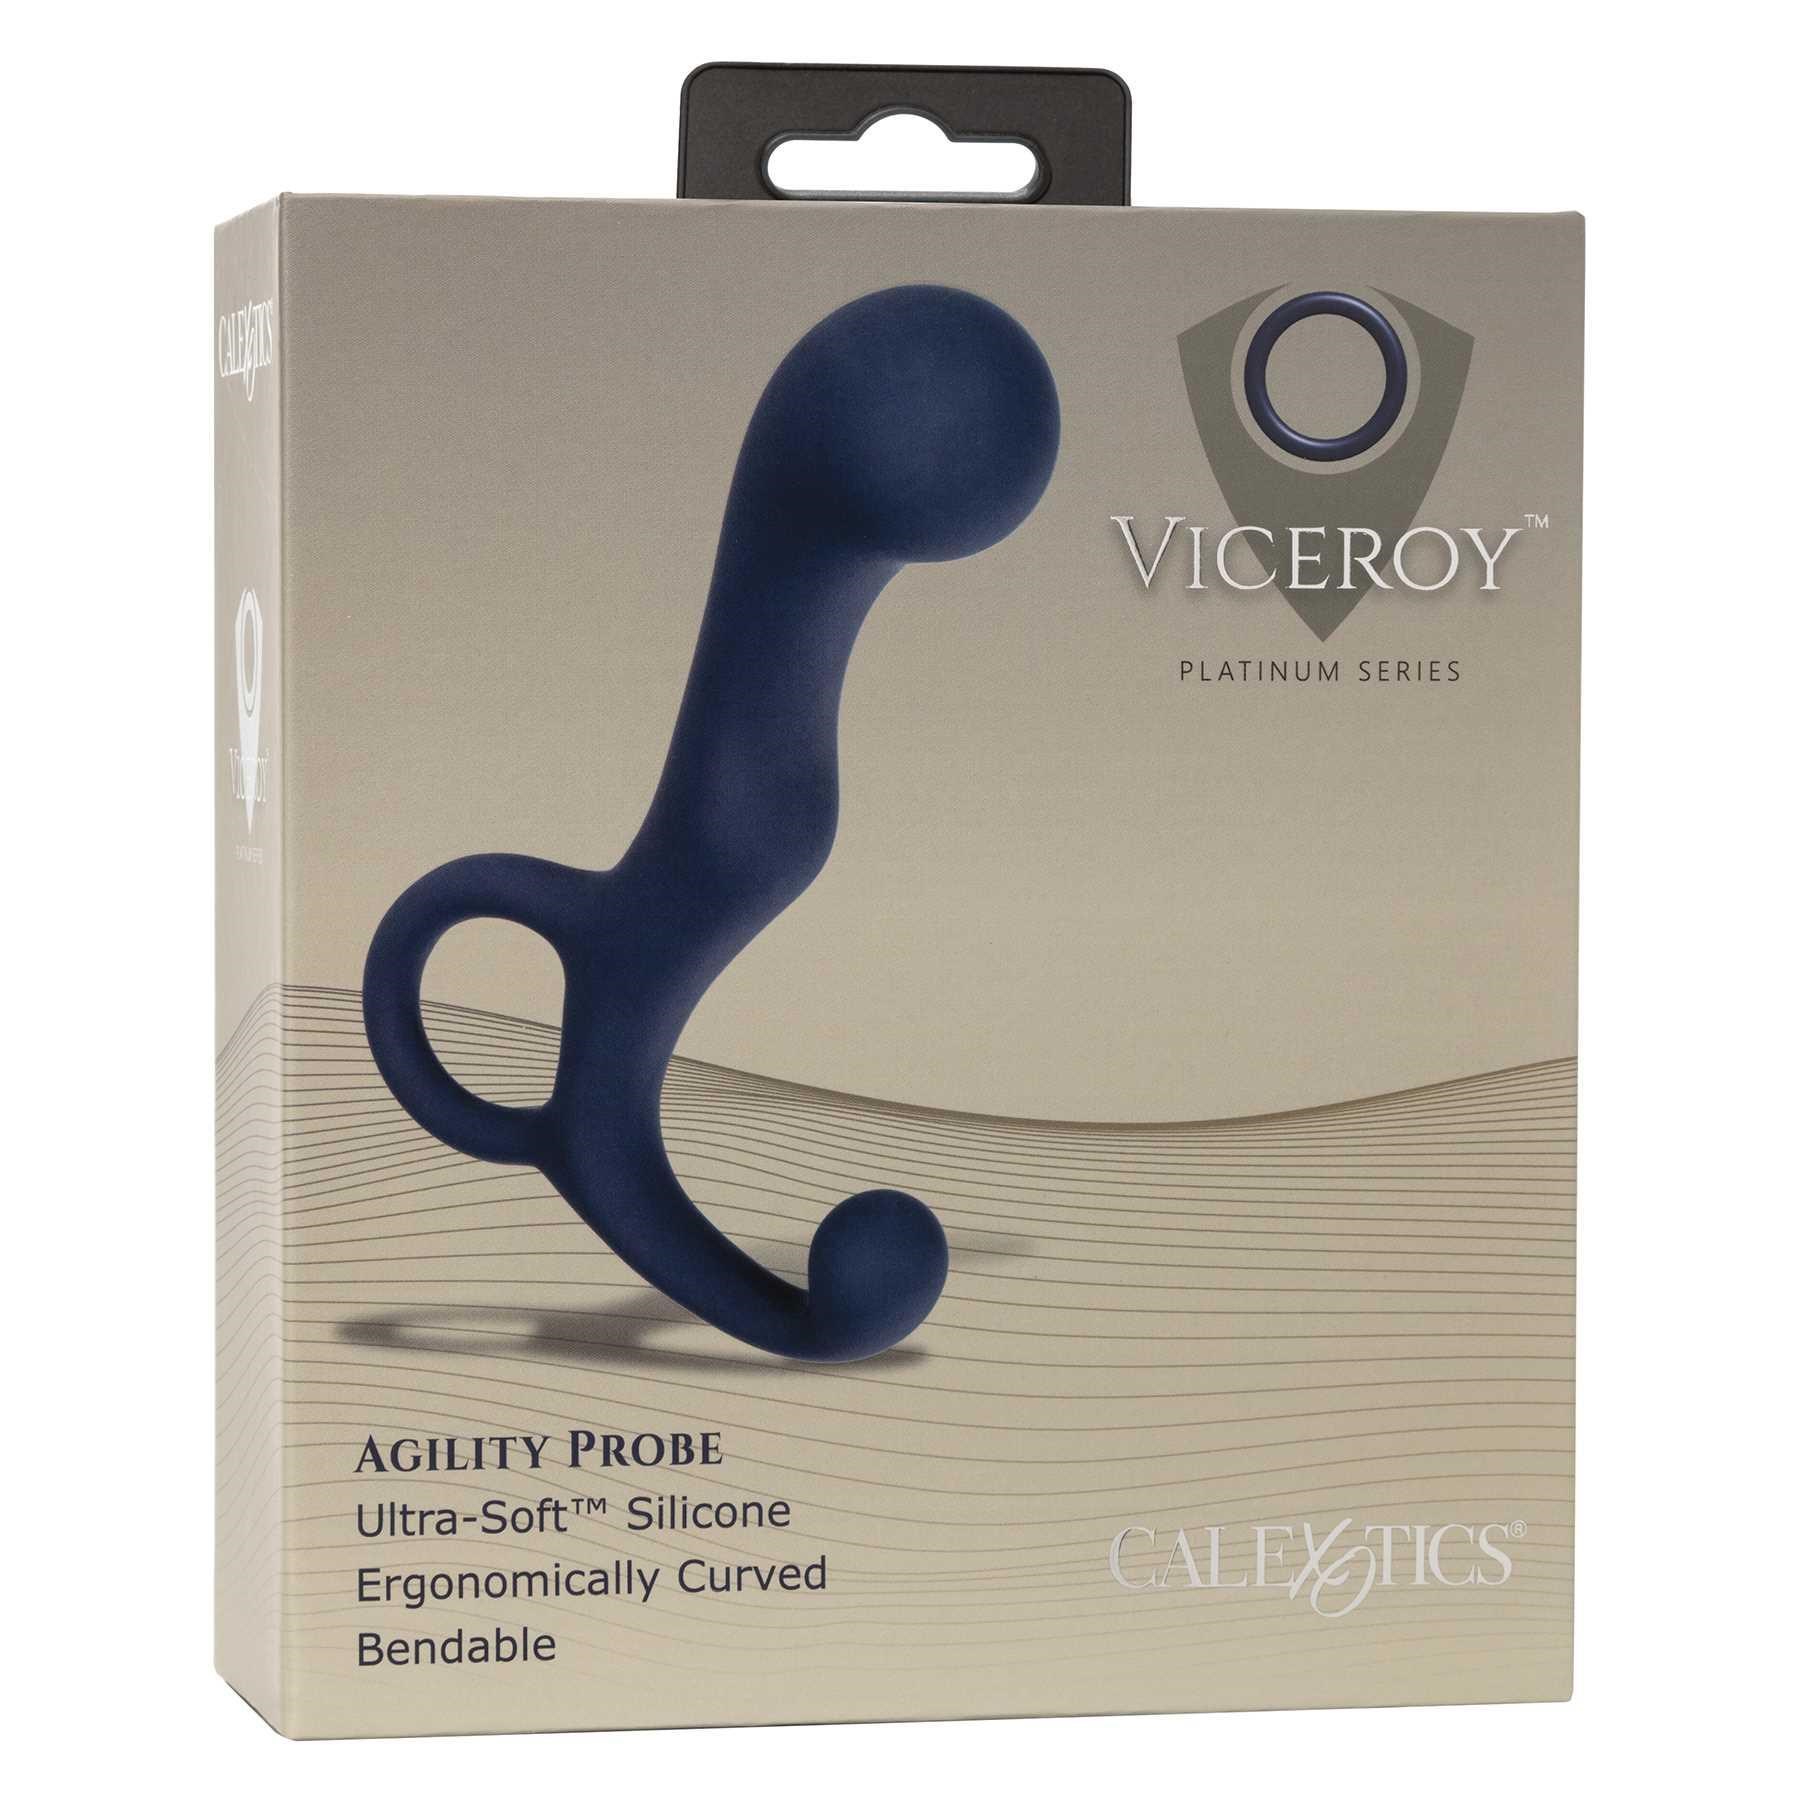 Viceroy Agility Prostate Probe packaging